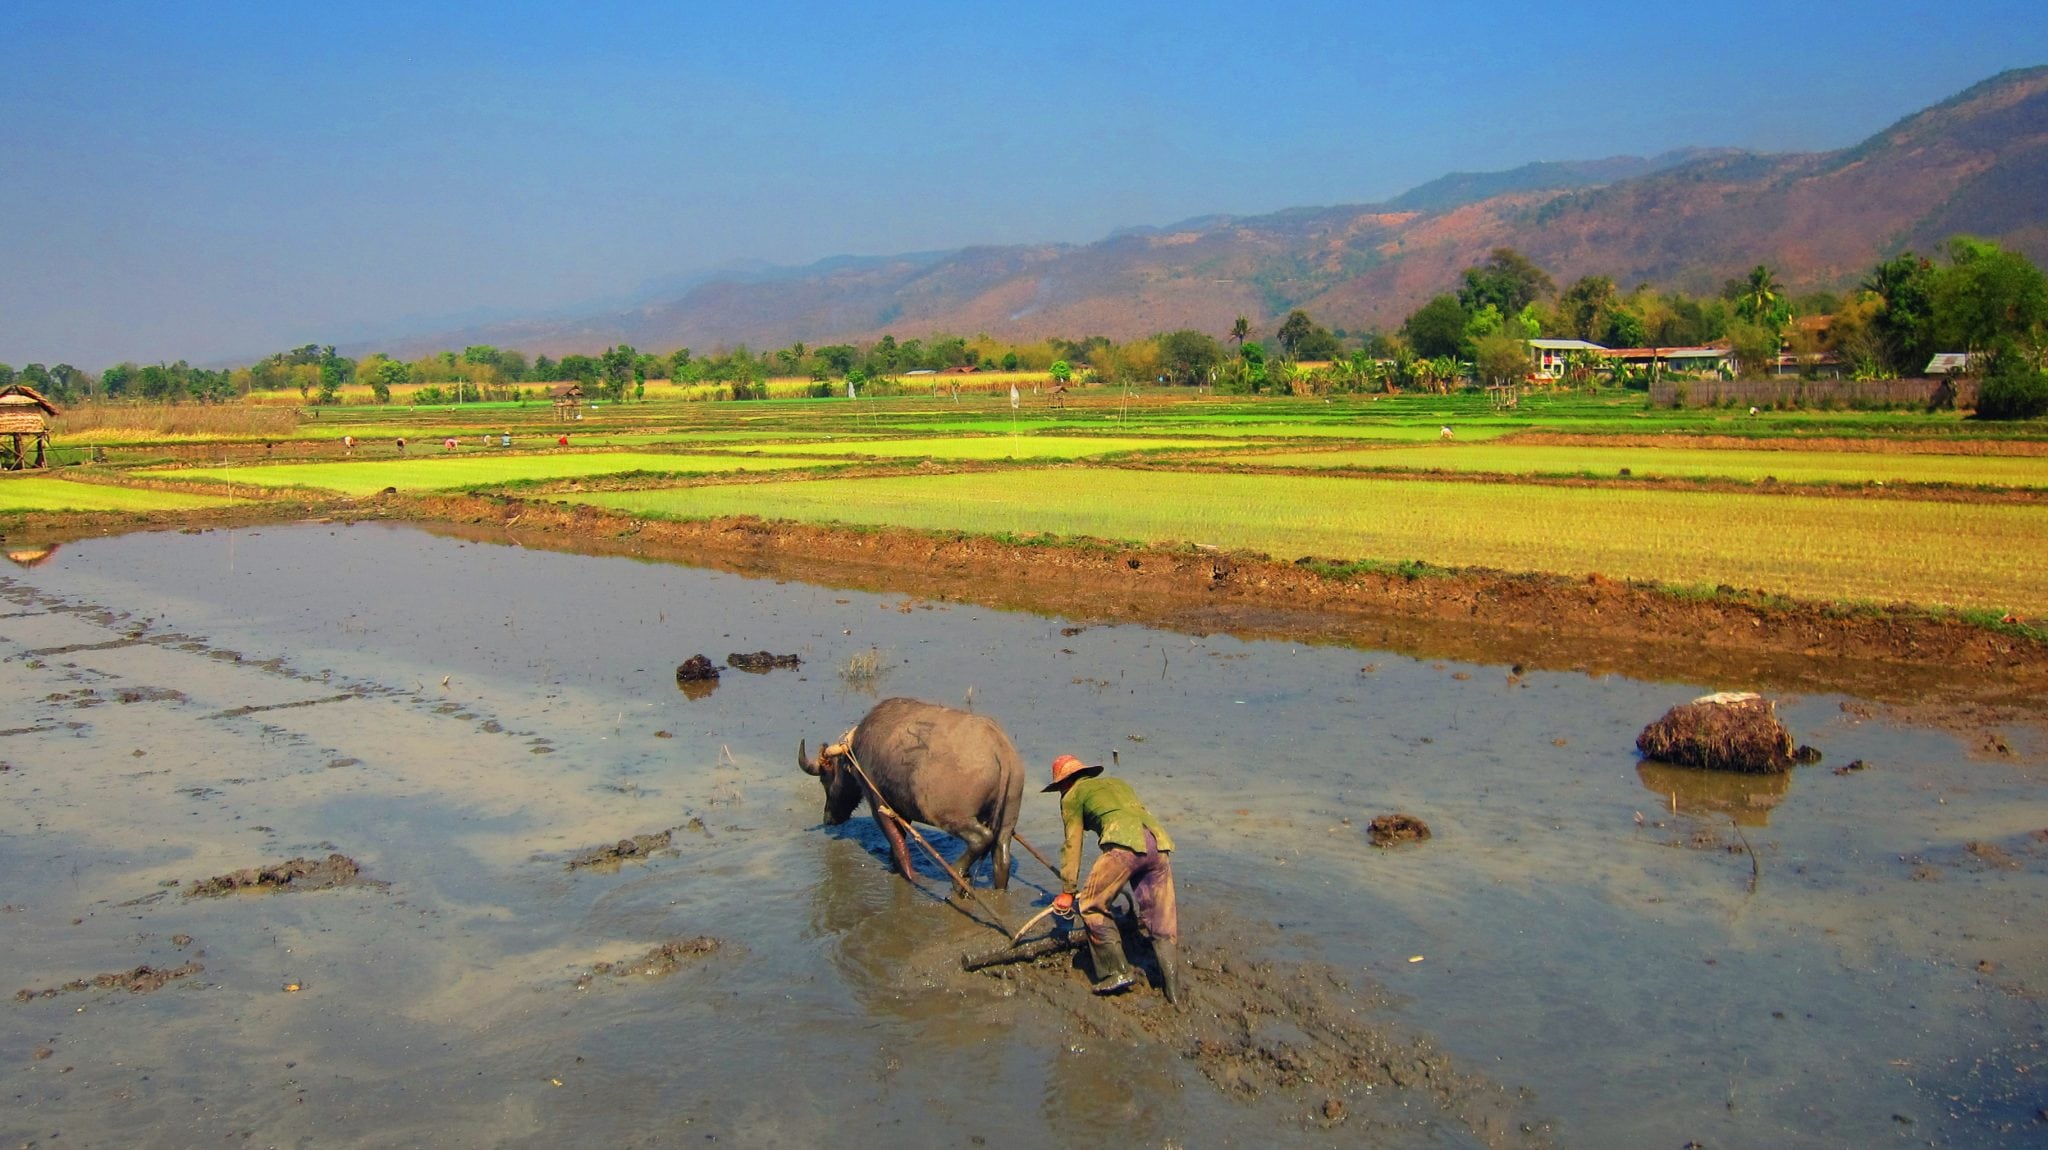 Farming is still primitive in most of the parts of Myanmar, this one in Inle Lake region. 